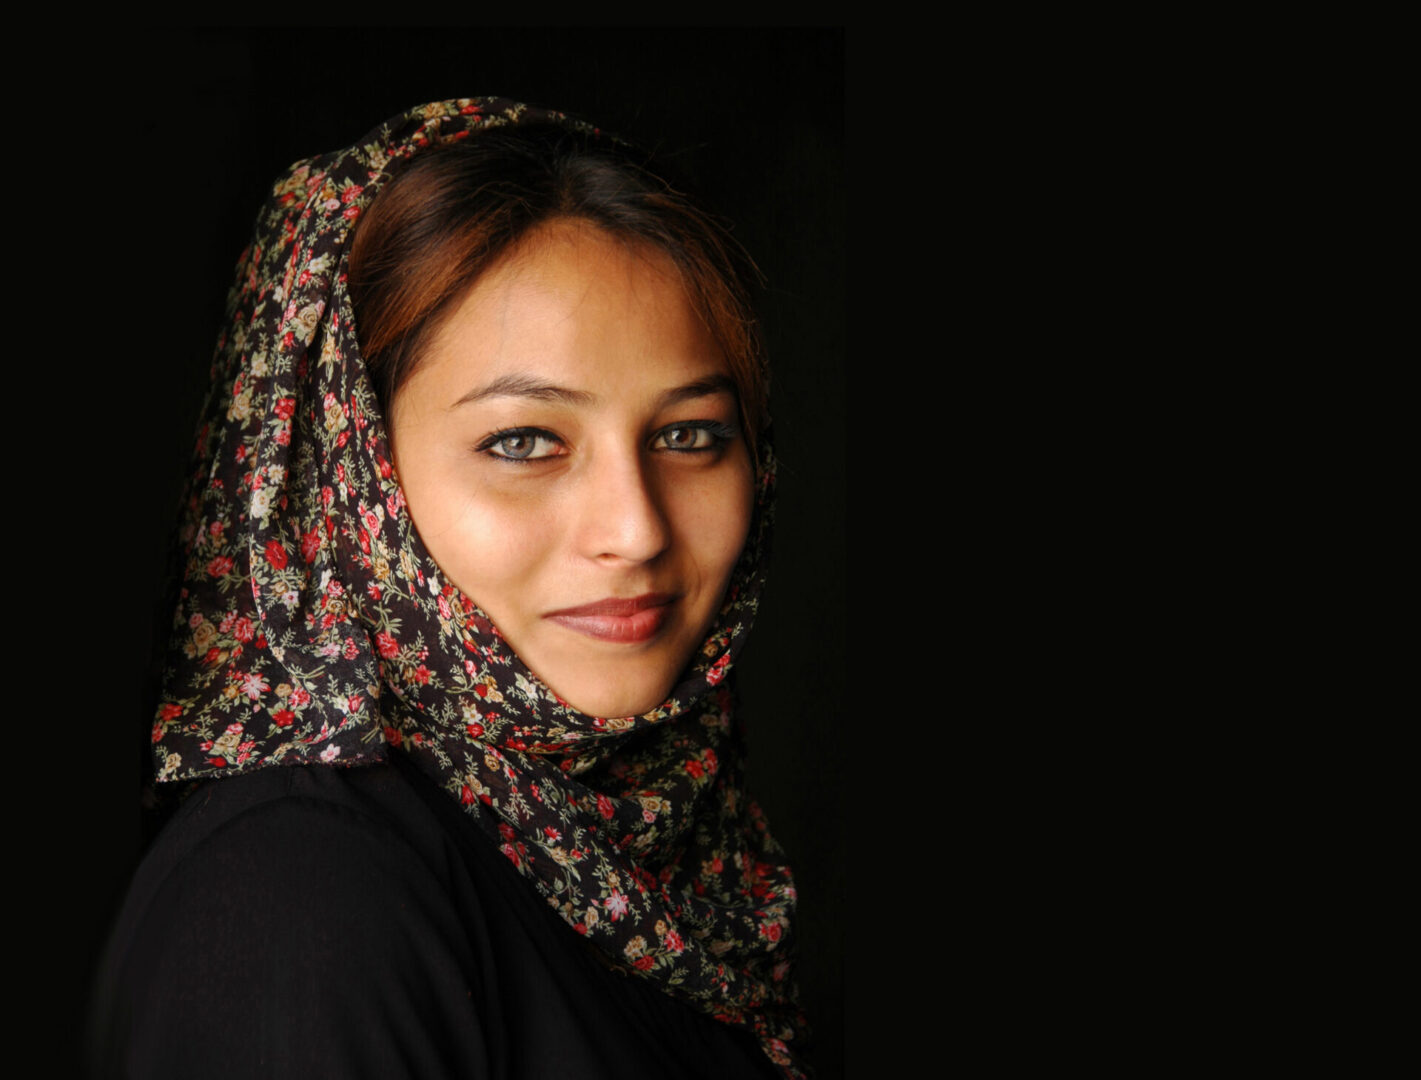 colored headshot photograph of woman in floral hijab